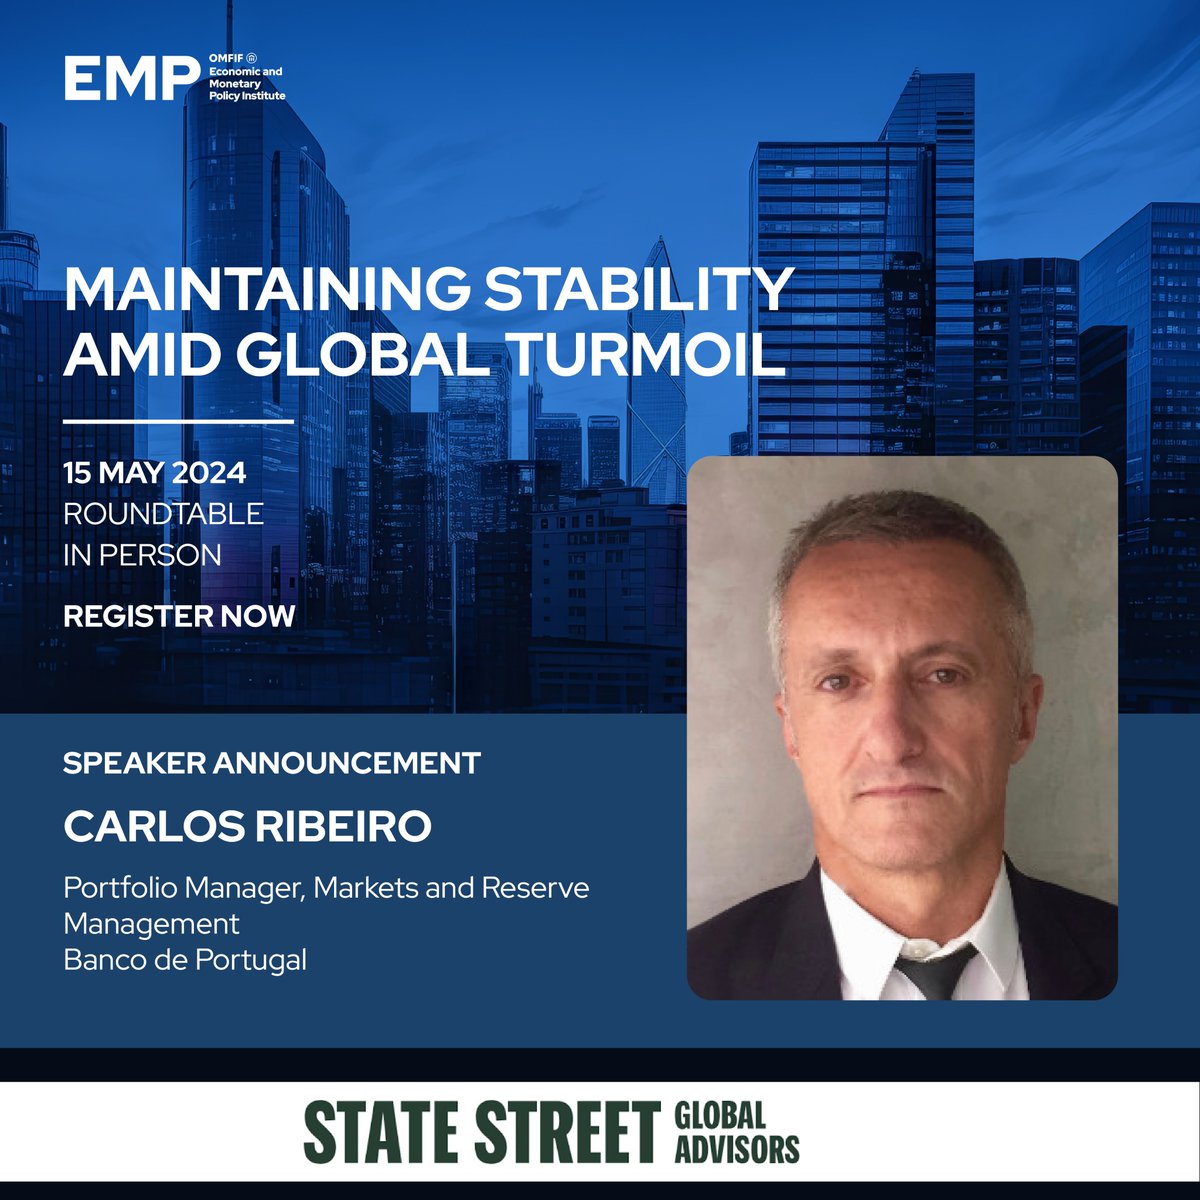 We are excited to announce that Carlos Ribeiro of @bancodeportugal will be joining us at the 'Maintaining stability amidst global turmoil' roundtable with @StateStreetGA next week. Find out more and register your interest to attend here: omfif.org/meetings/maint…